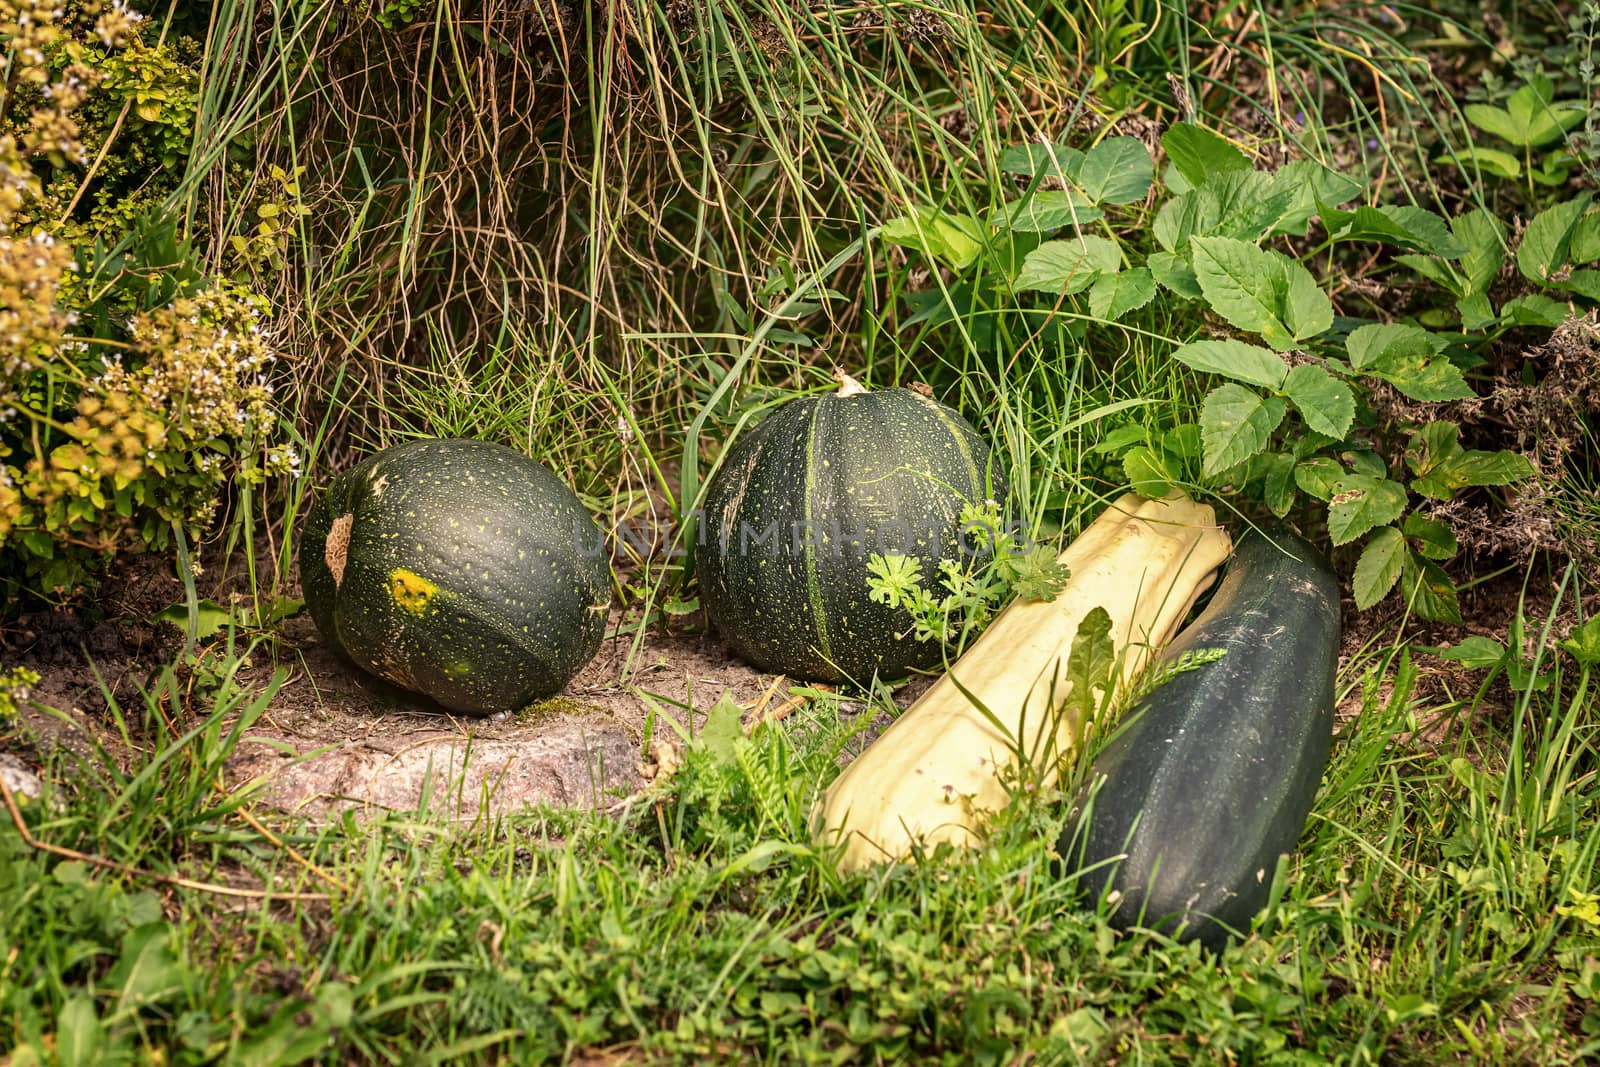 Pumpkins and squashes on the grass